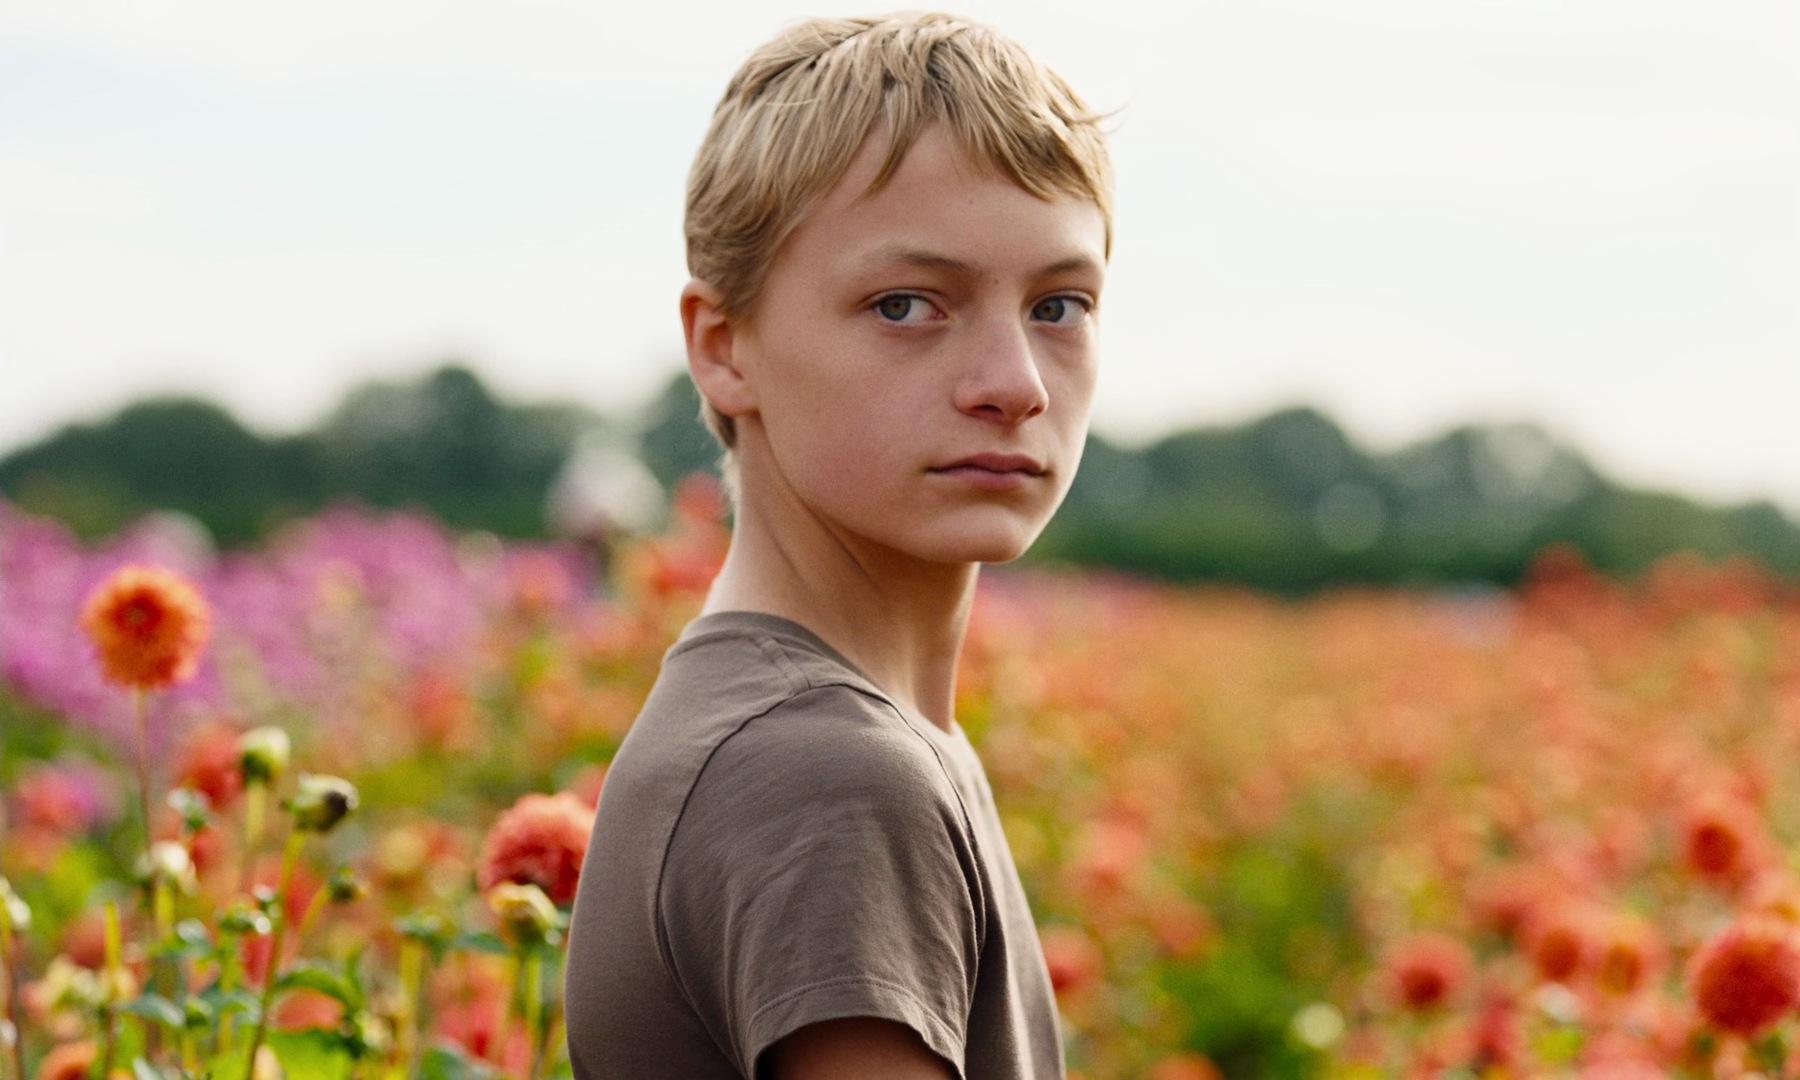 Leo from the movie Close standing in a flower field